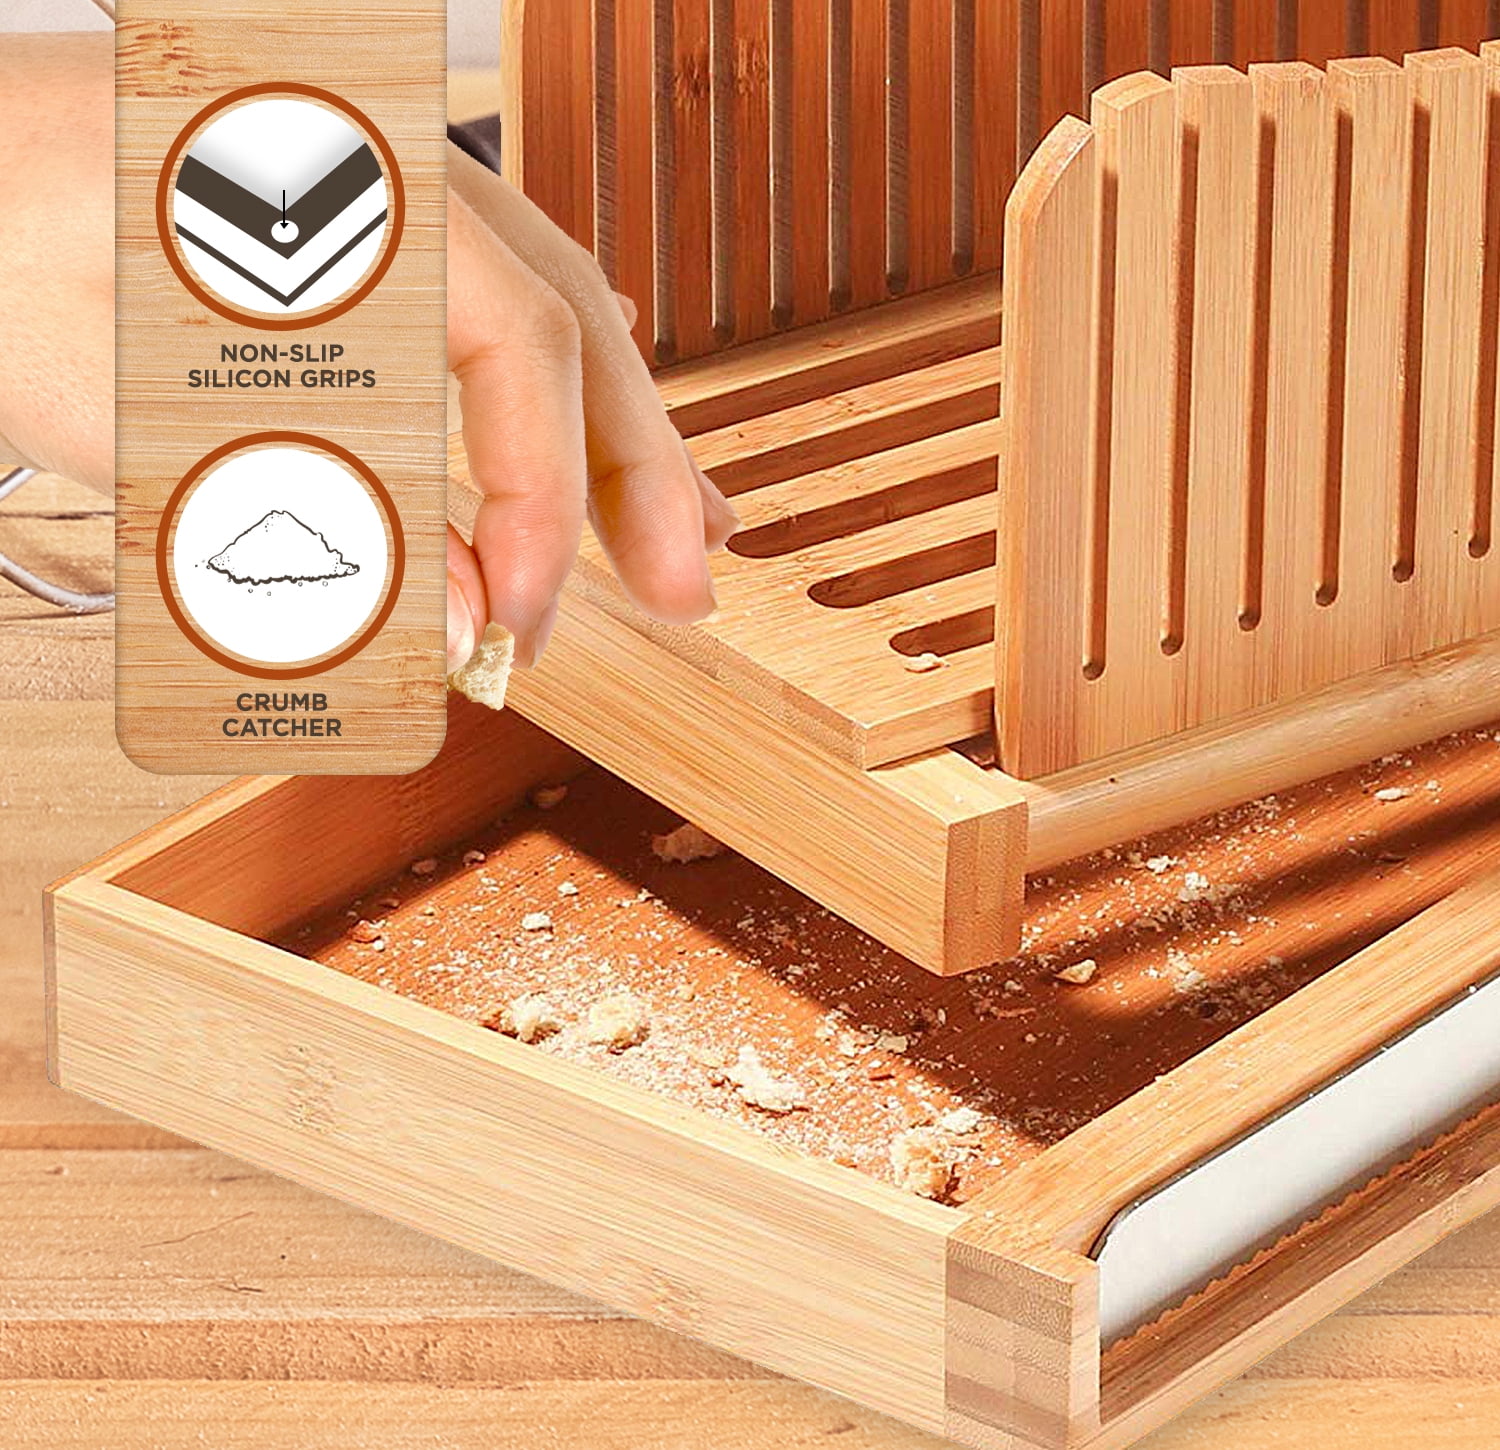 A Home Bamboo Bread Slicer For Homemade Bread Loaf – Wooden Bread Cutting  Board With Crumble Holder